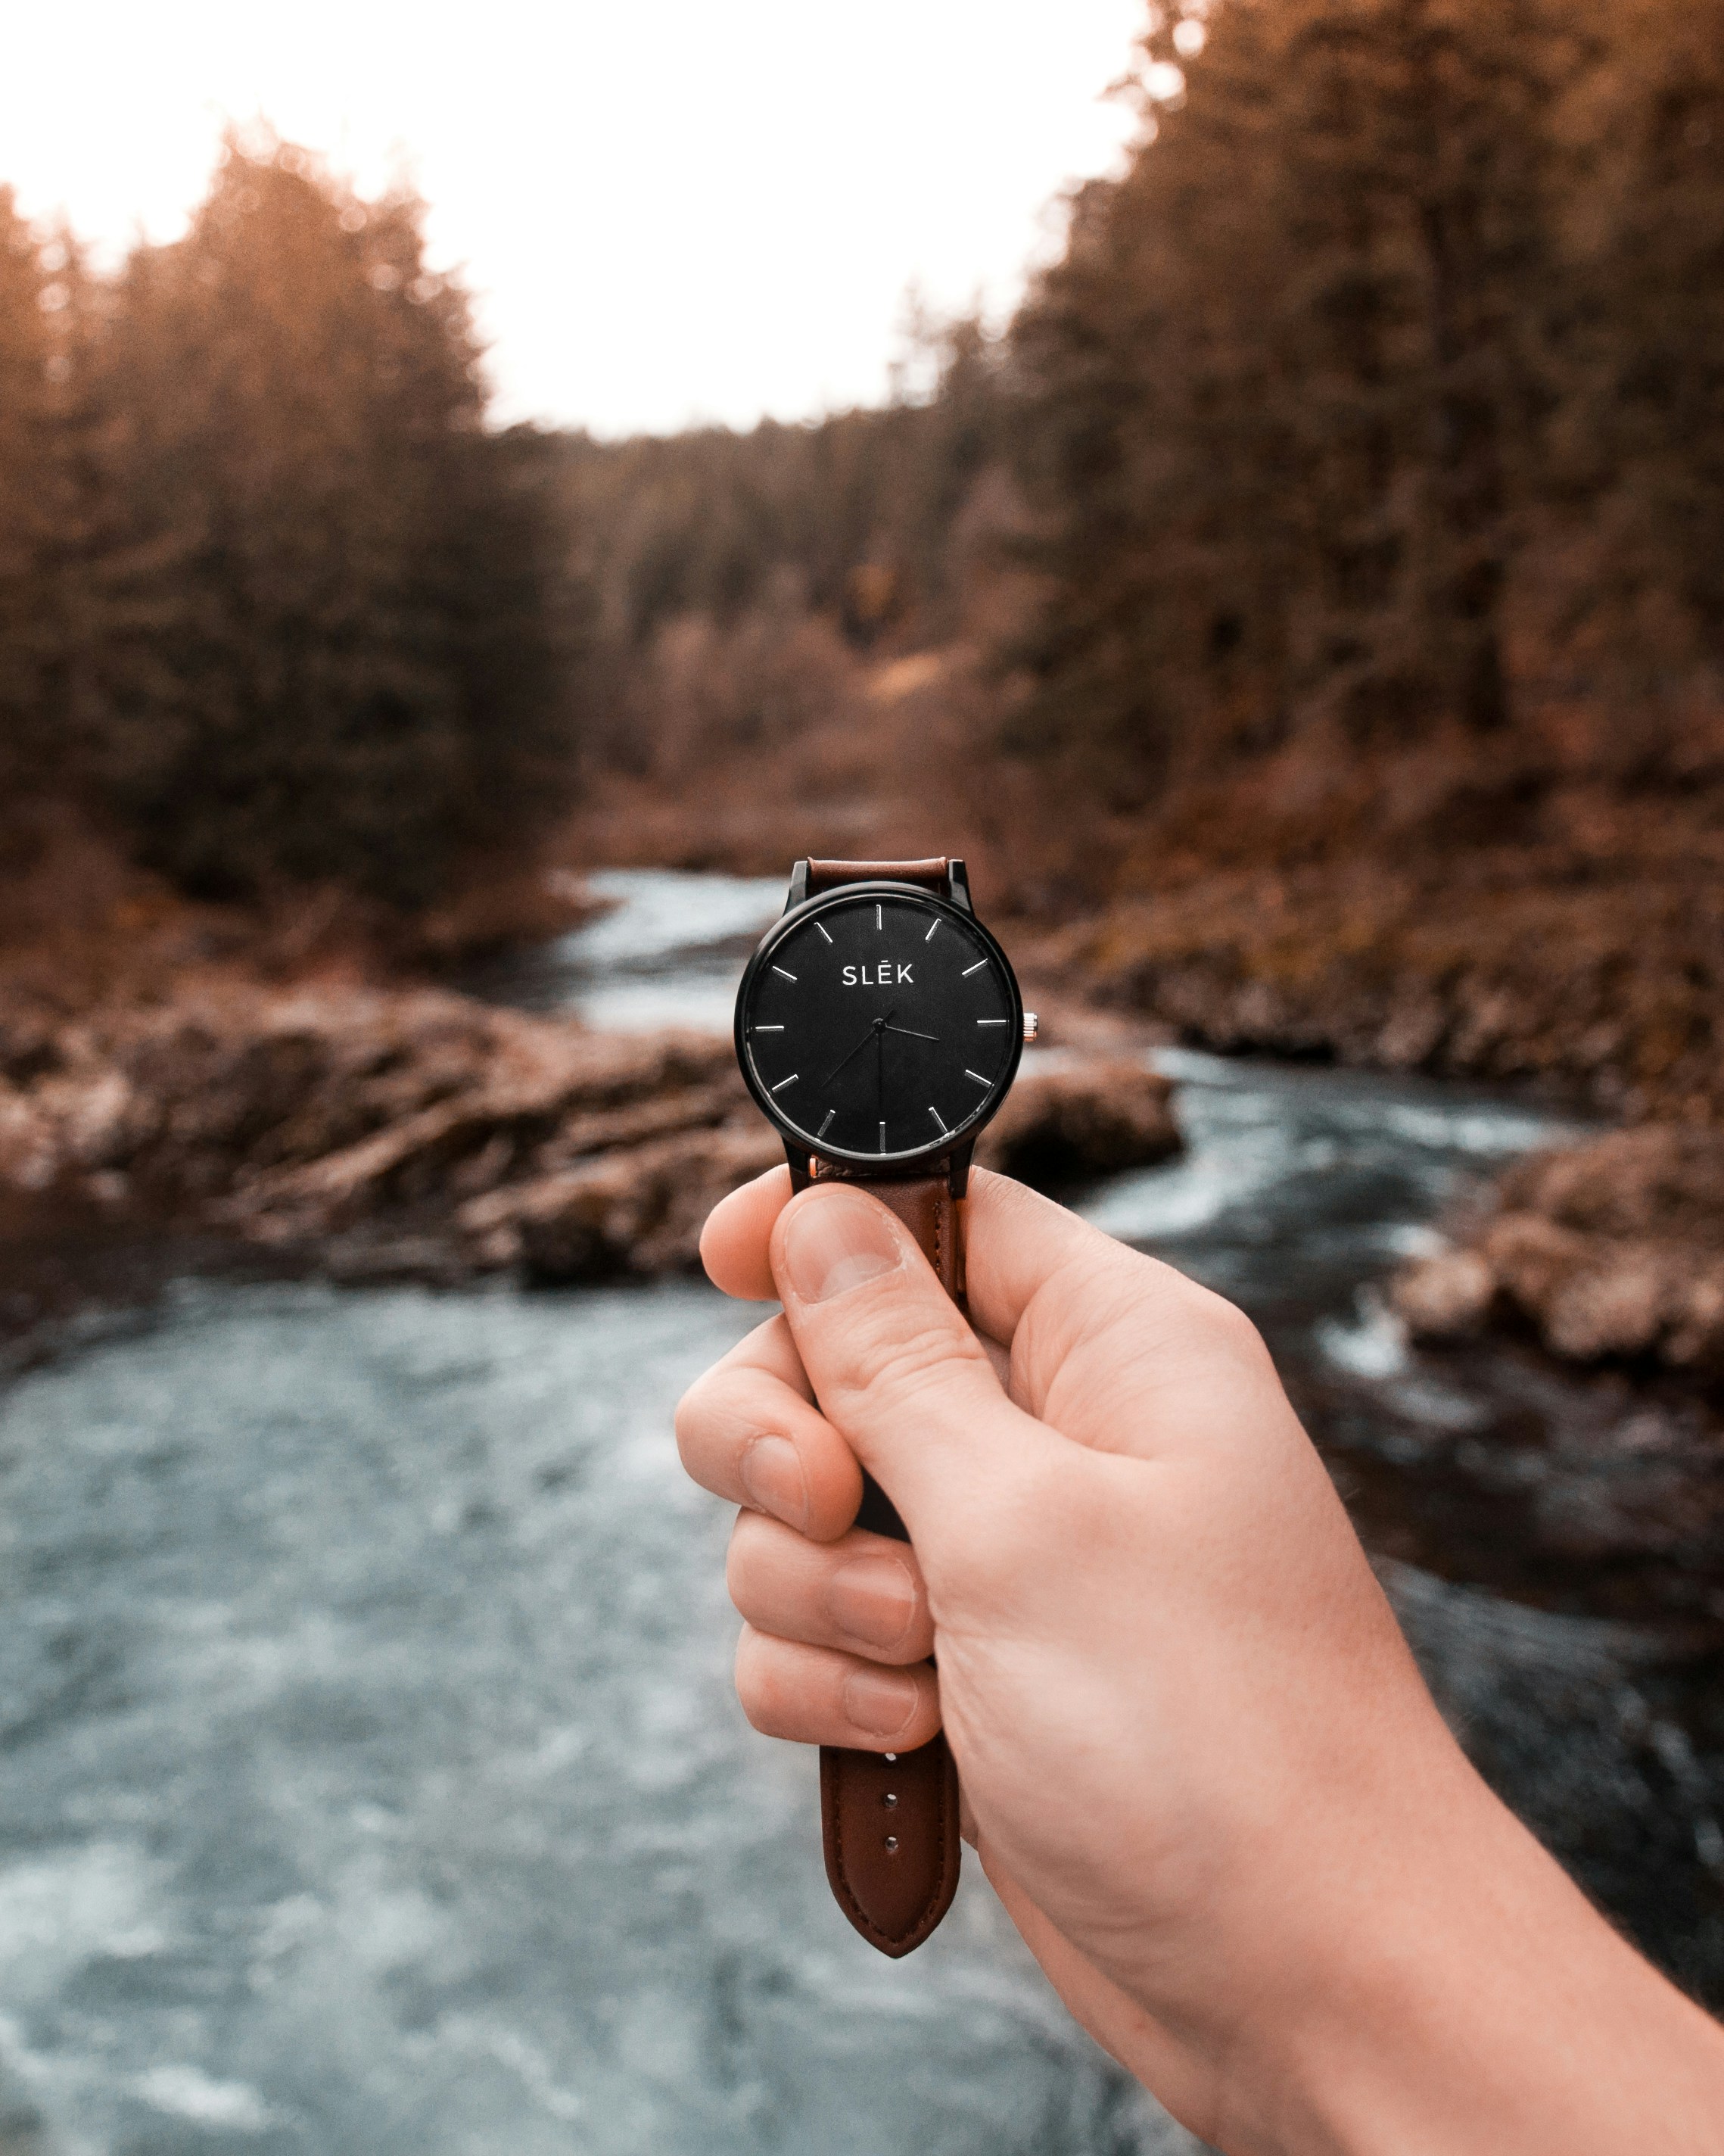 Was doing some product photos for Slek Watches, went to Moulton Falls State Park which has some beautiful scenery. This is one of my favorite ones from the shoot.